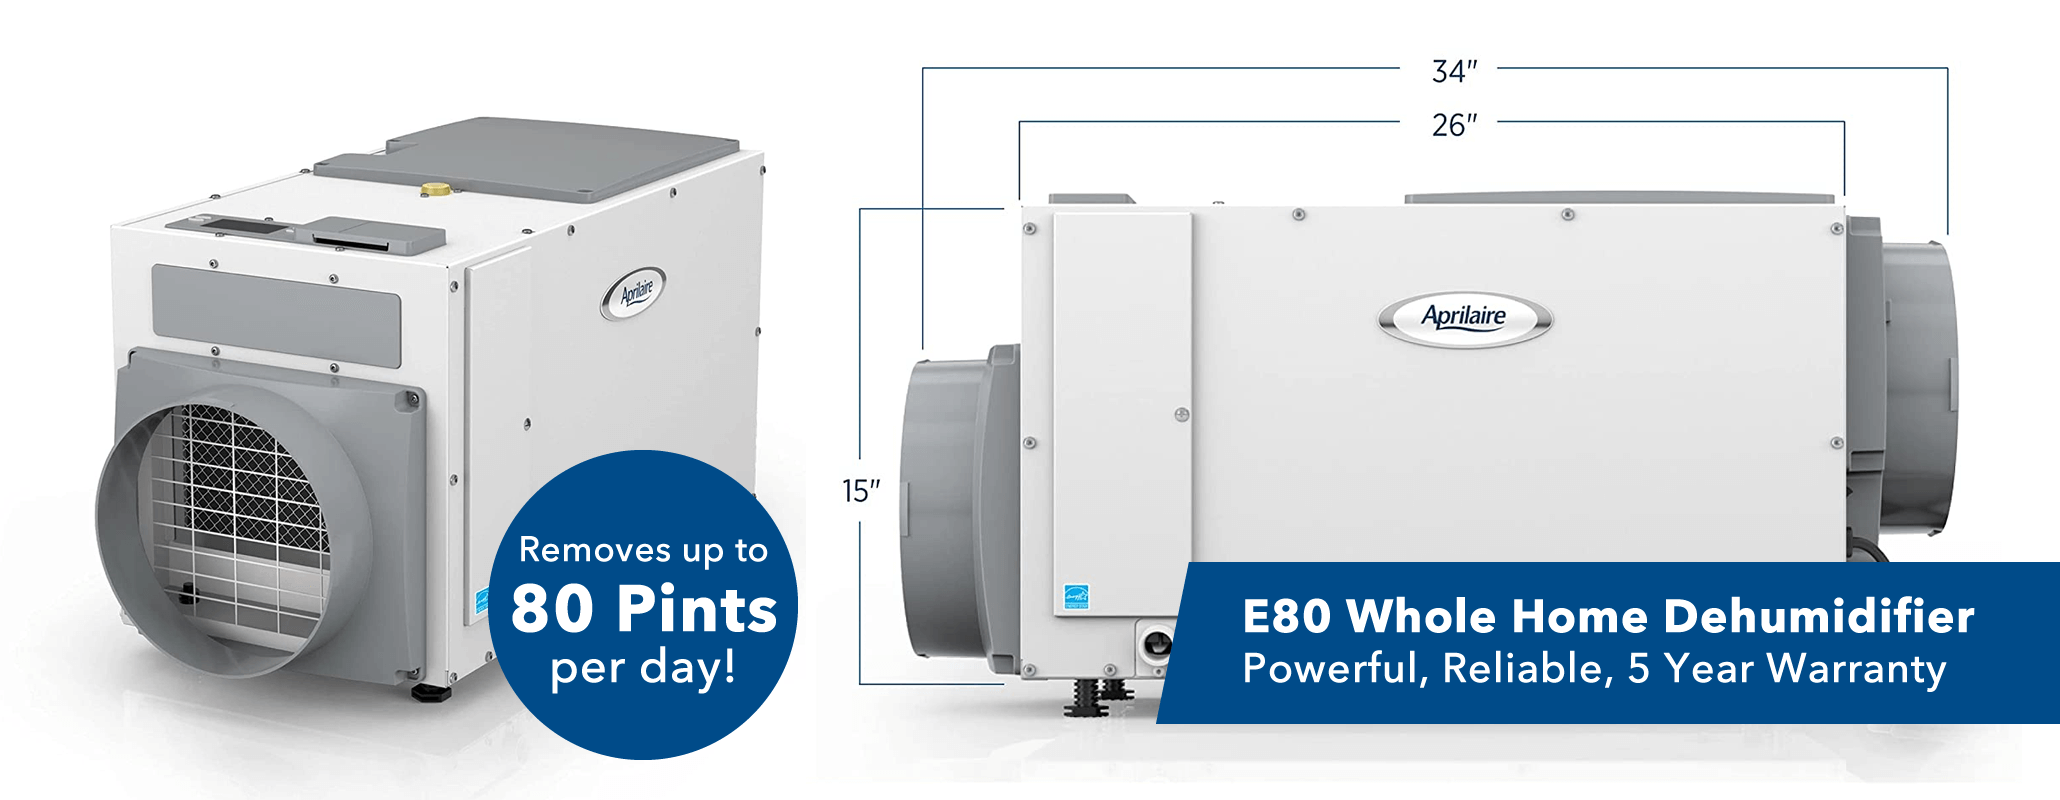 Aprilaire Dehumidifiers, E80 Whole House Model. Removes nearly 80 pints per day in most conditions!